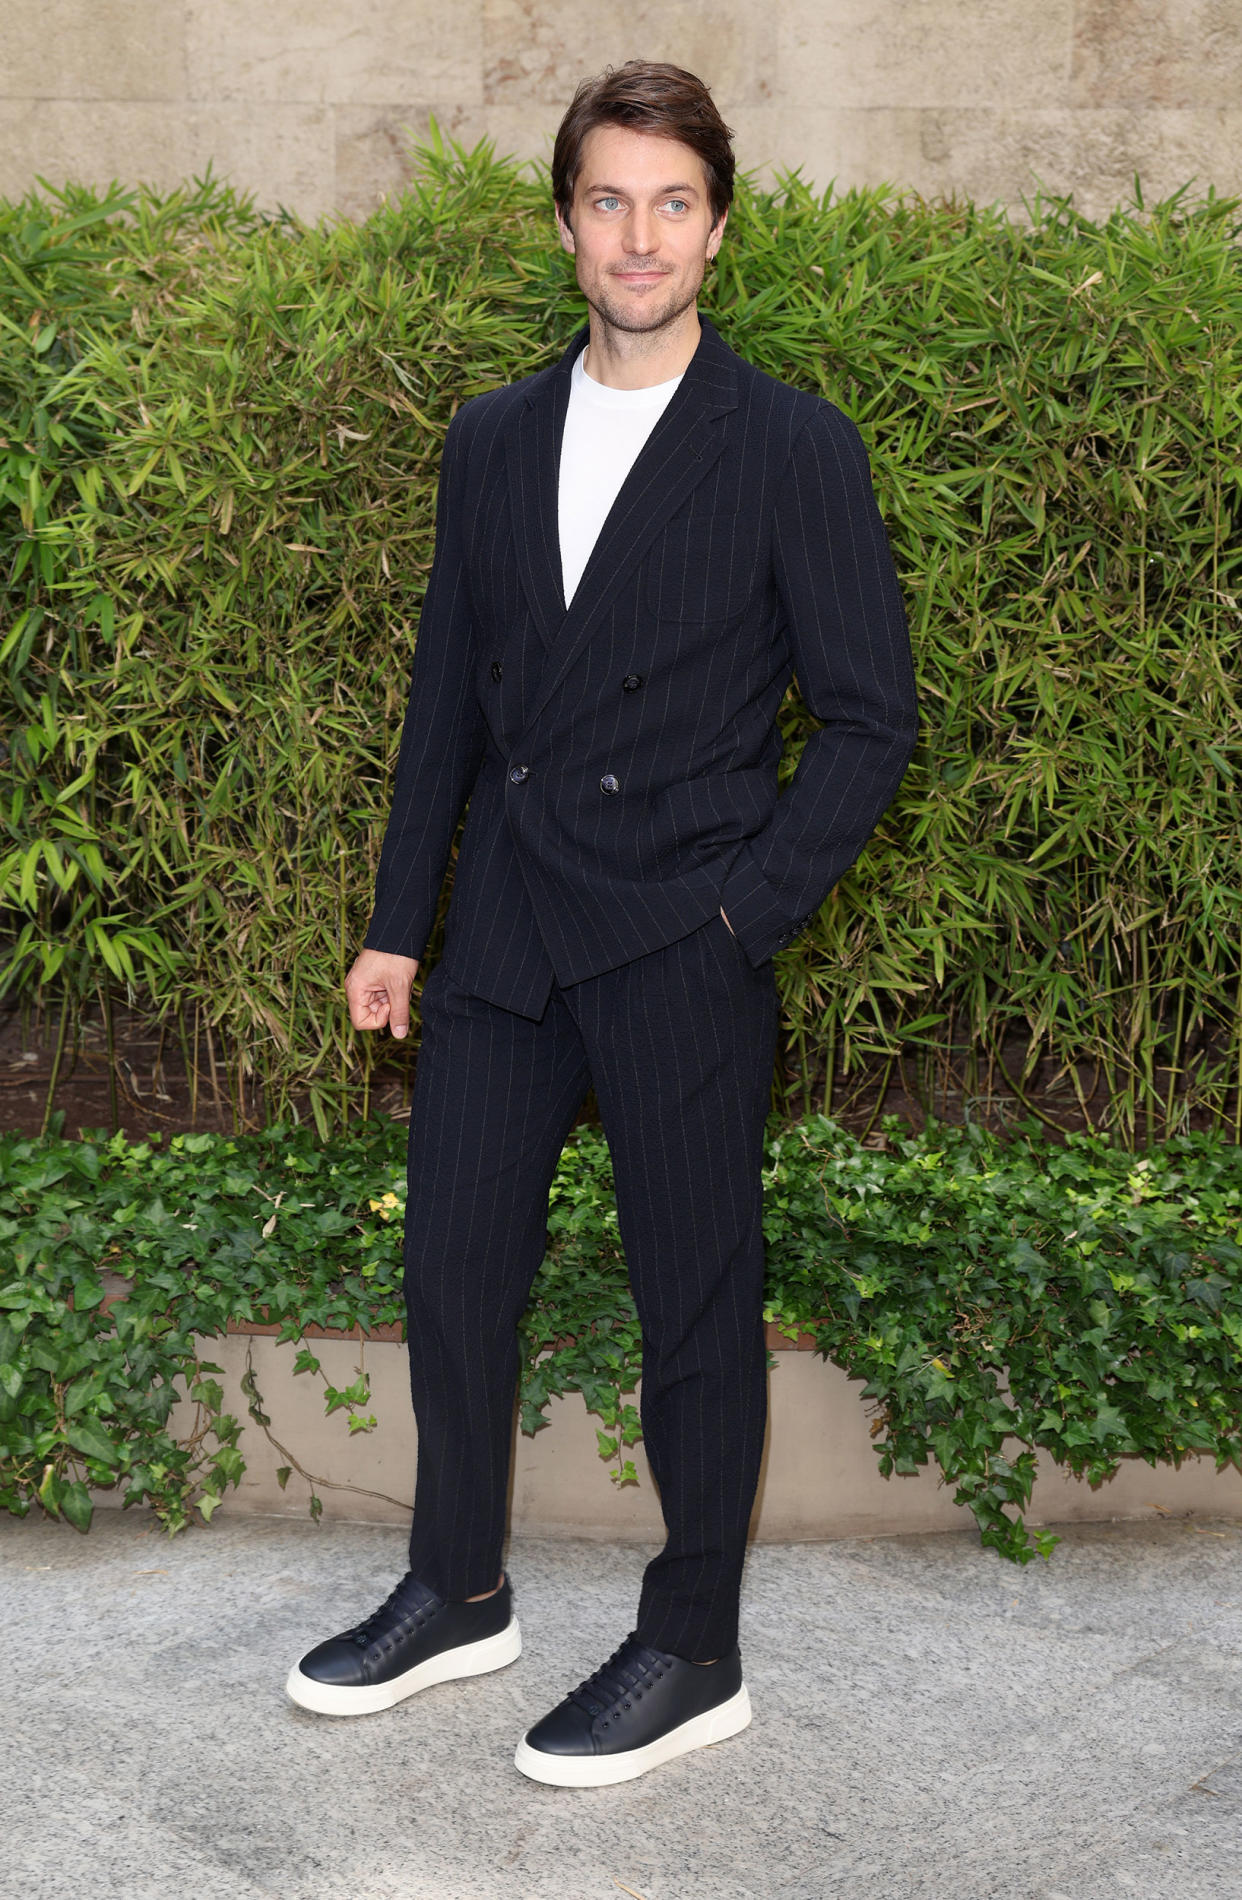 MILAN, ITALY - JUNE 20: Lucas Bravo is seen on the front row at the Giorgio Armani fashion show during the Milan Fashion Week S/S 2023 on June 20, 2022 in Milan, Italy. (Photo by Jacopo Raule/Getty Images) (Jacopo Raule / Getty Images)